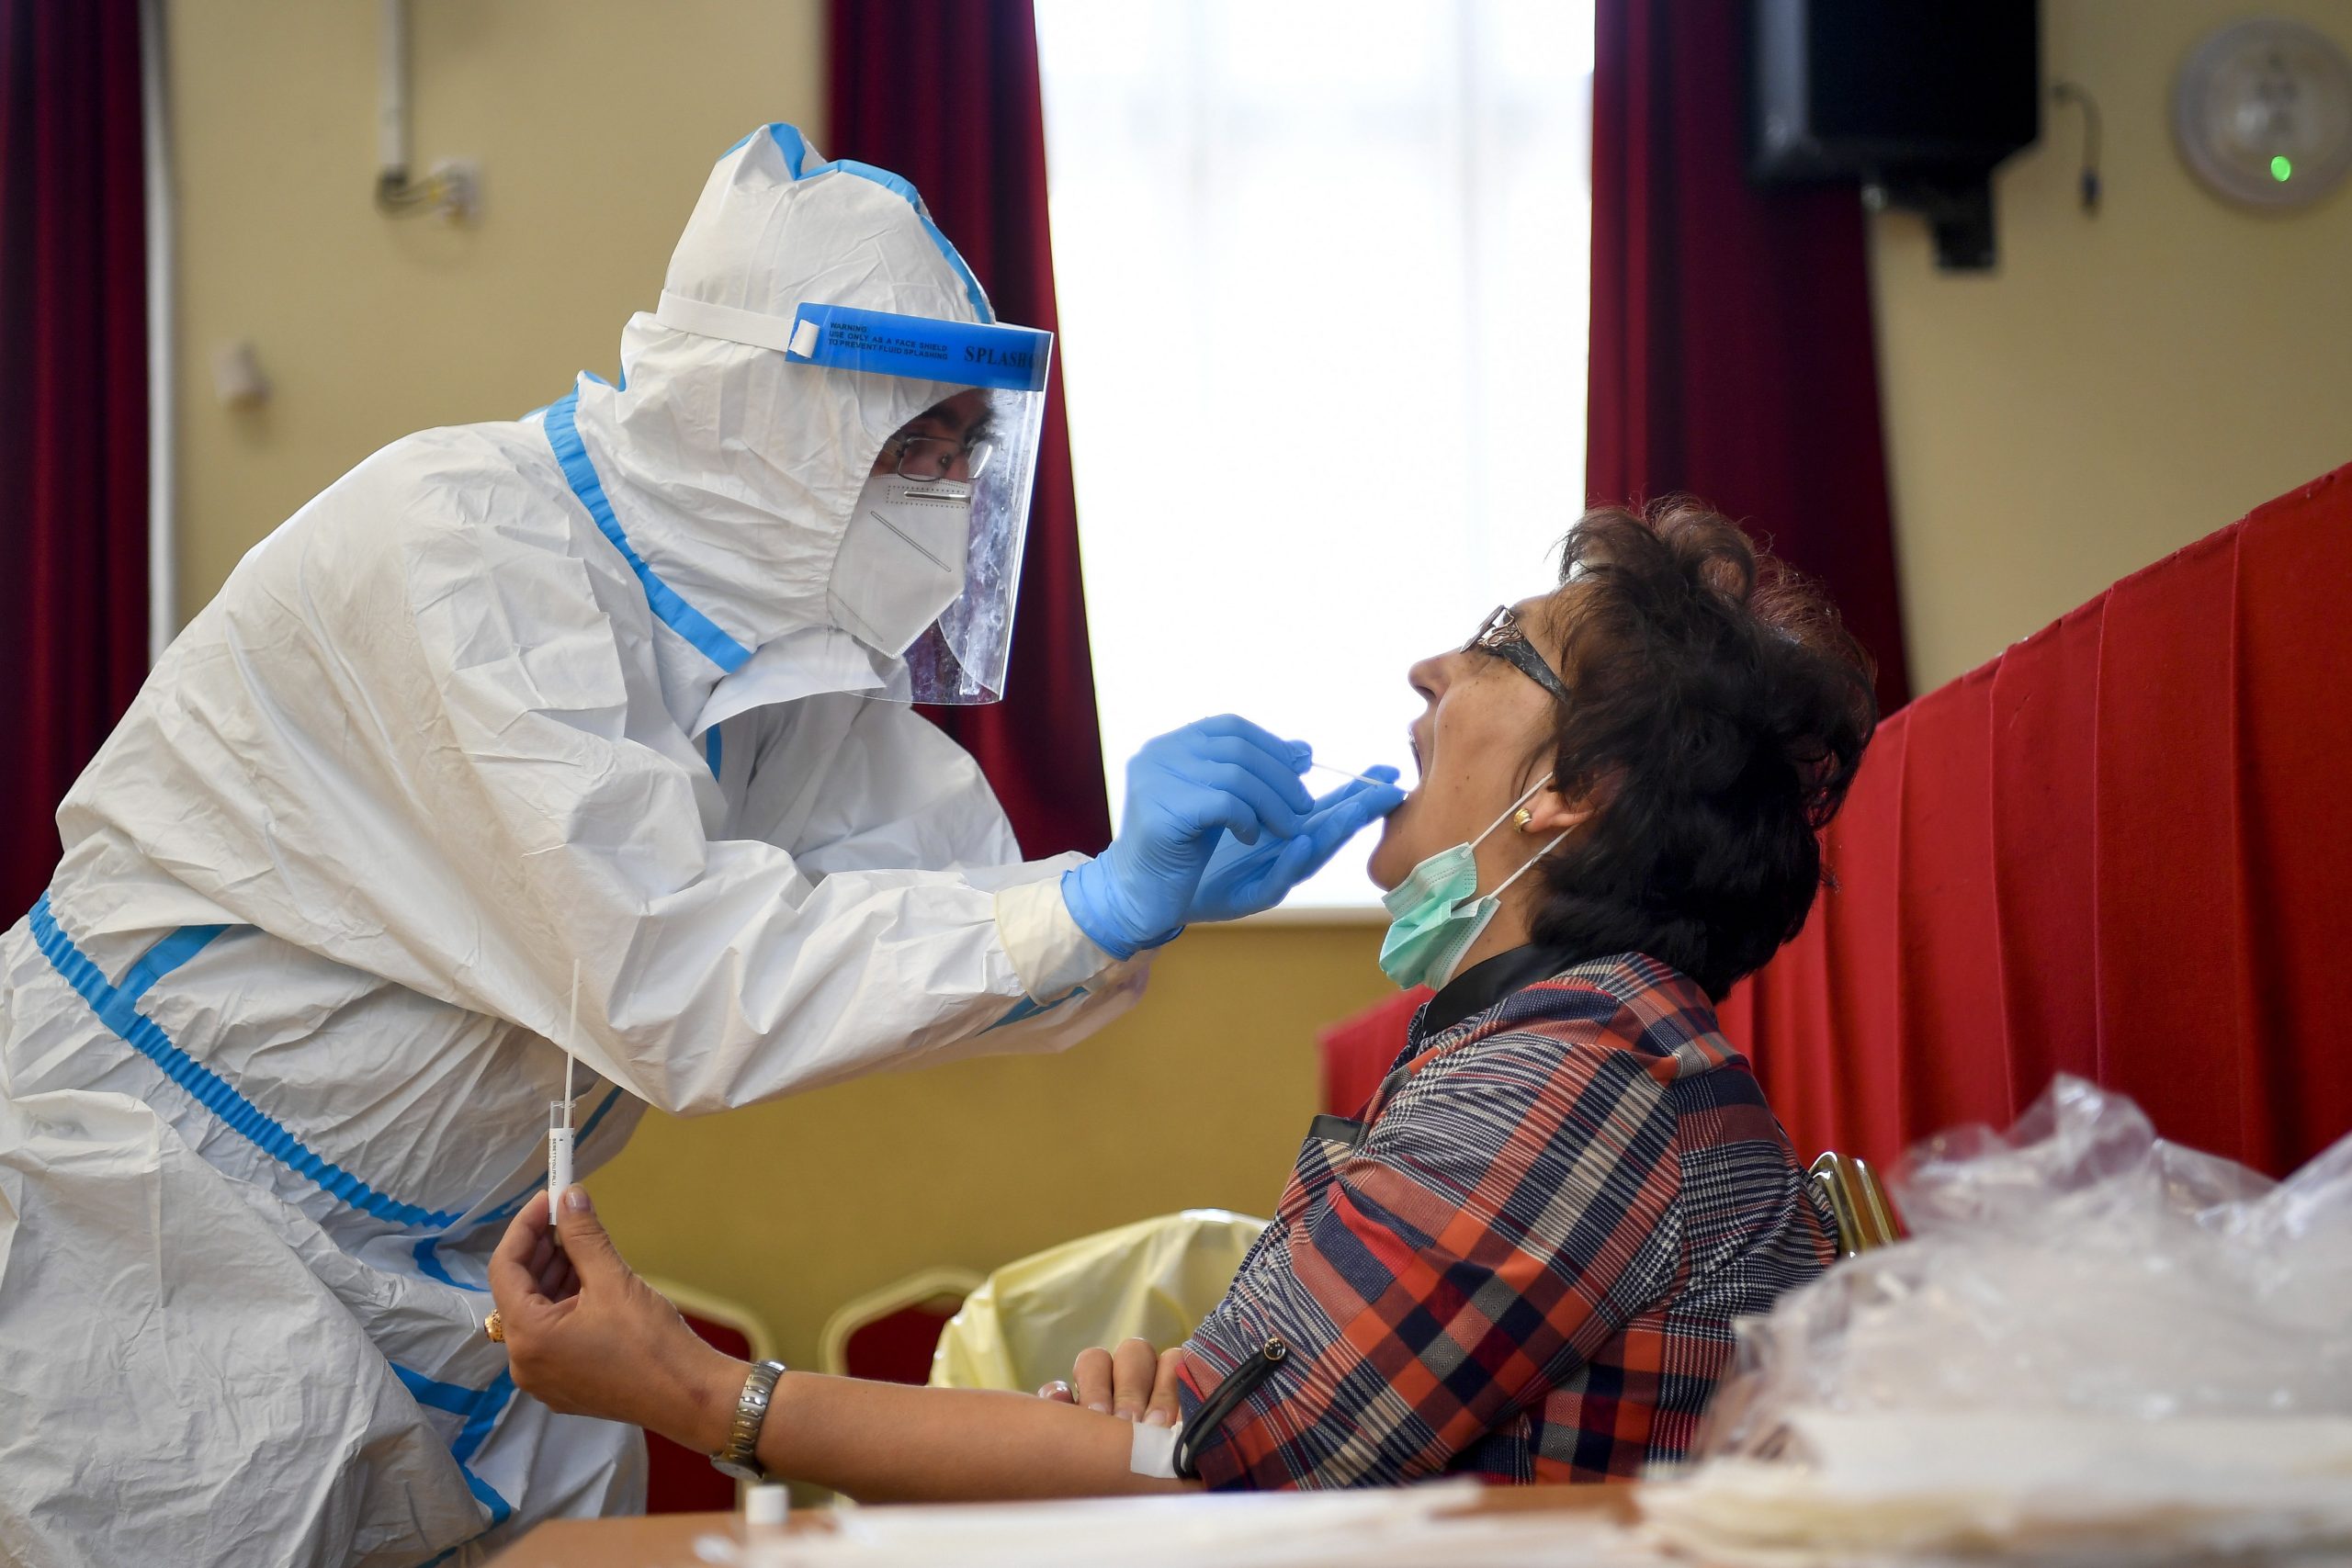 epa08400781 A medical professional wearing a protective suit takes a sample for a coronavirus test at a temporary testing station operated by the University of Debrecen Clinical Center in Berettyoujfalu, Hungary, 04 May, 2020. Four Hungarian medical training schools have begun the screening of some 18 thousand people as a representative statistical sample to get exact figures concerning the spread of the coronavirus in Hungary.  EPA/Zsolt Czegledi HUNGARY OUT